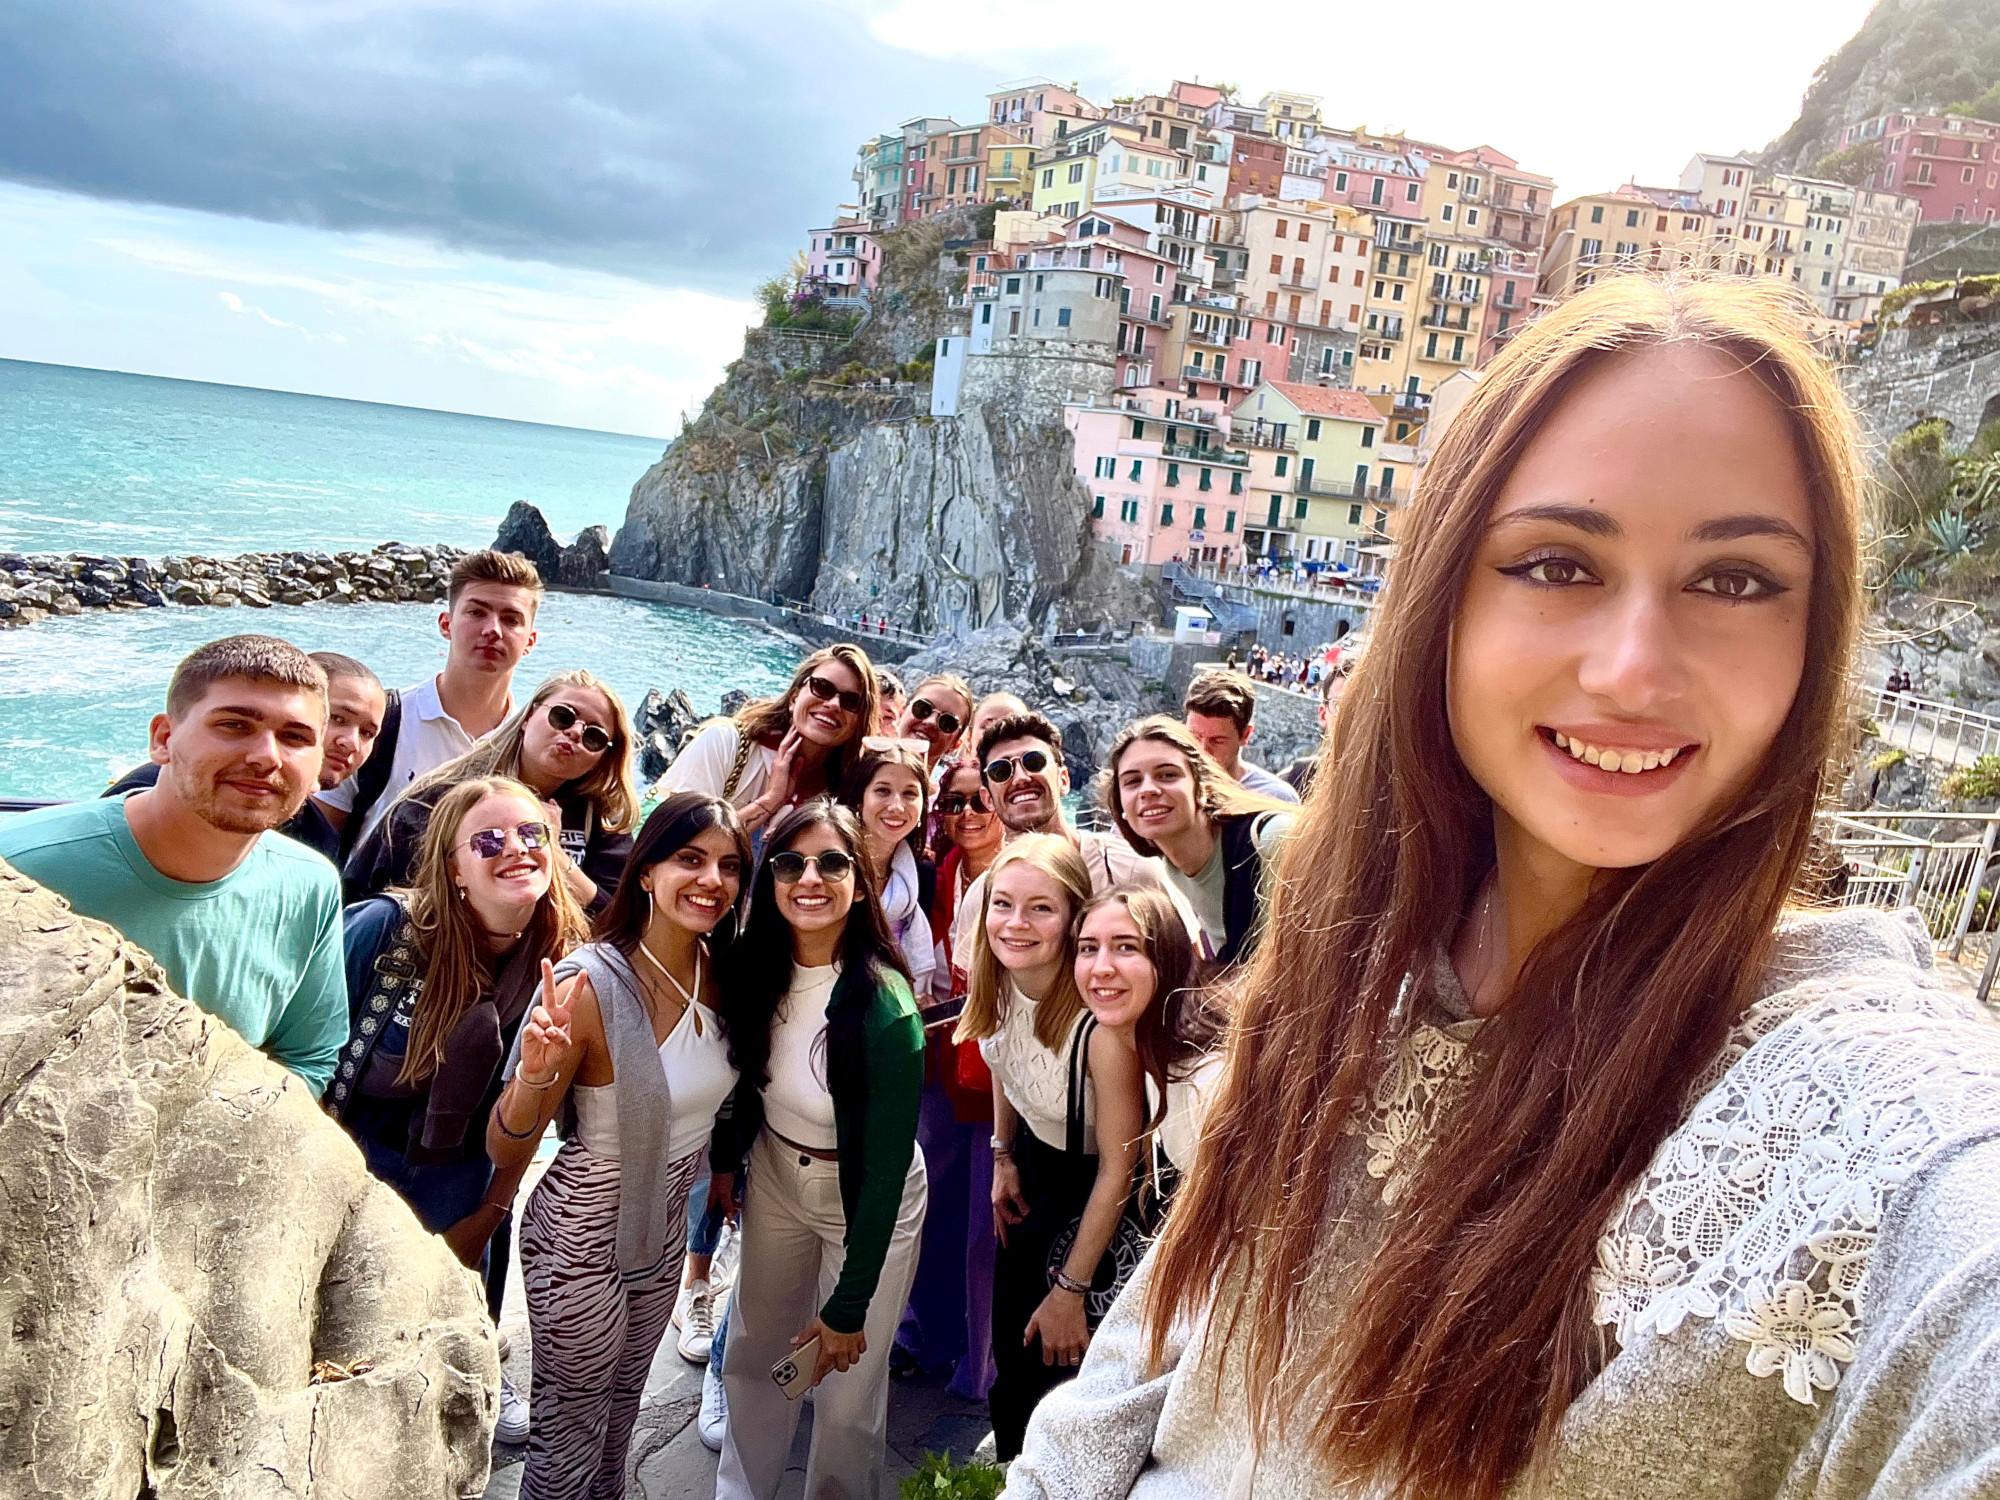 A young girl with a group of other young adults with an old Italian town on a rocky cliff and a sea down